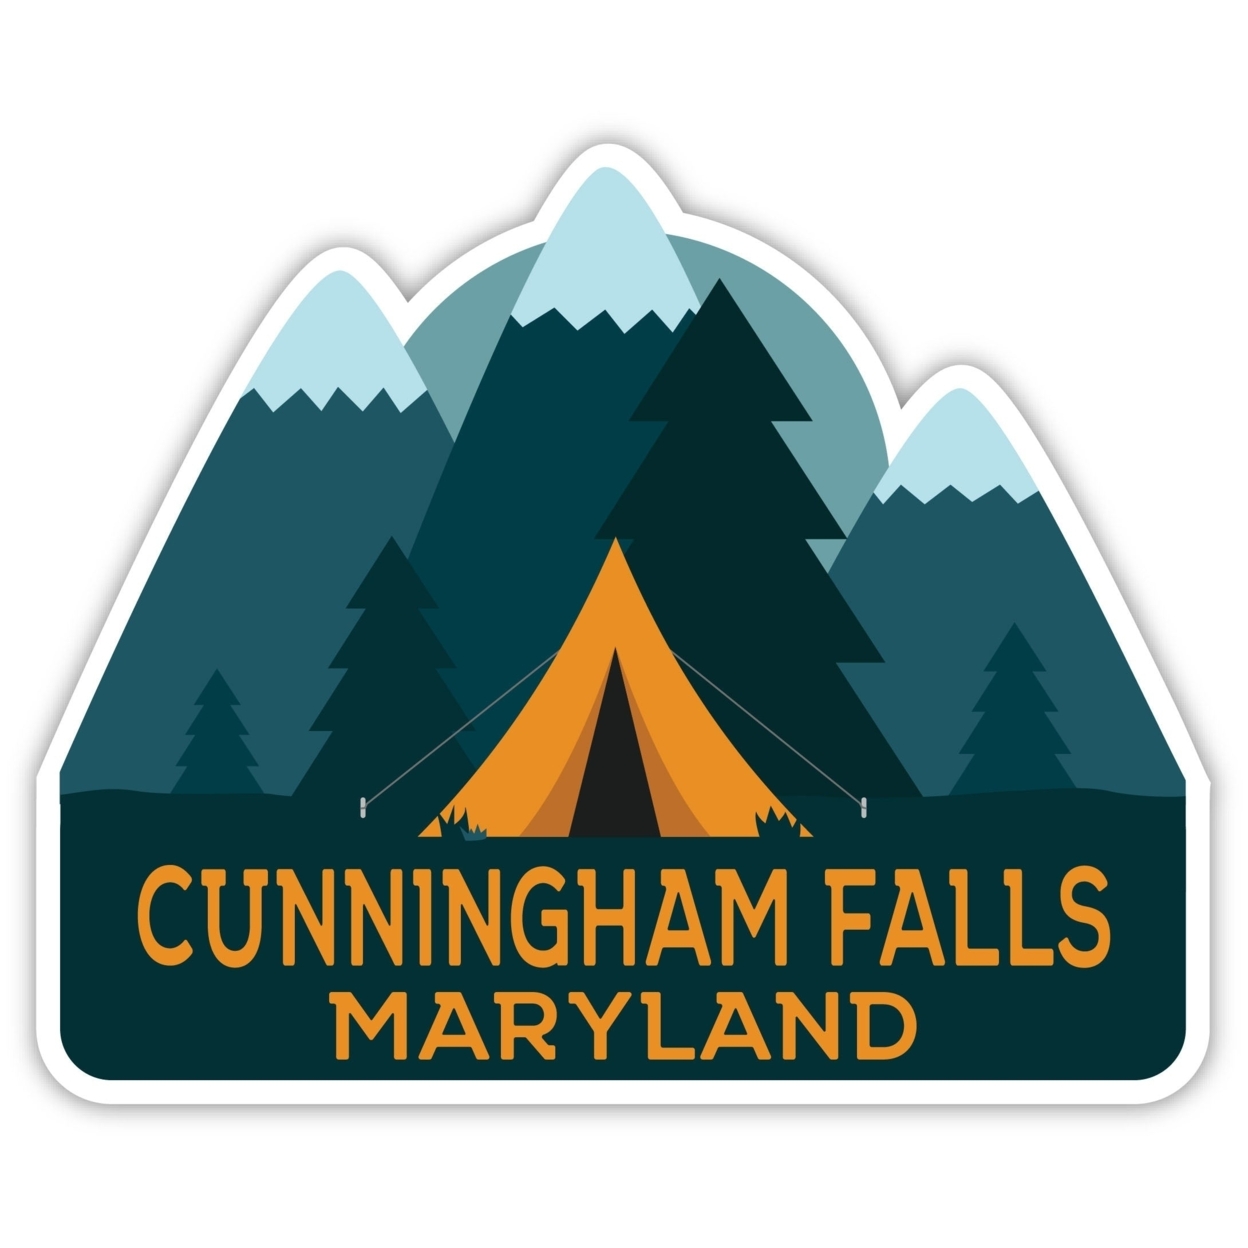 Cunningham Falls Maryland Souvenir Decorative Stickers (Choose Theme And Size) - Single Unit, 2-Inch, Tent